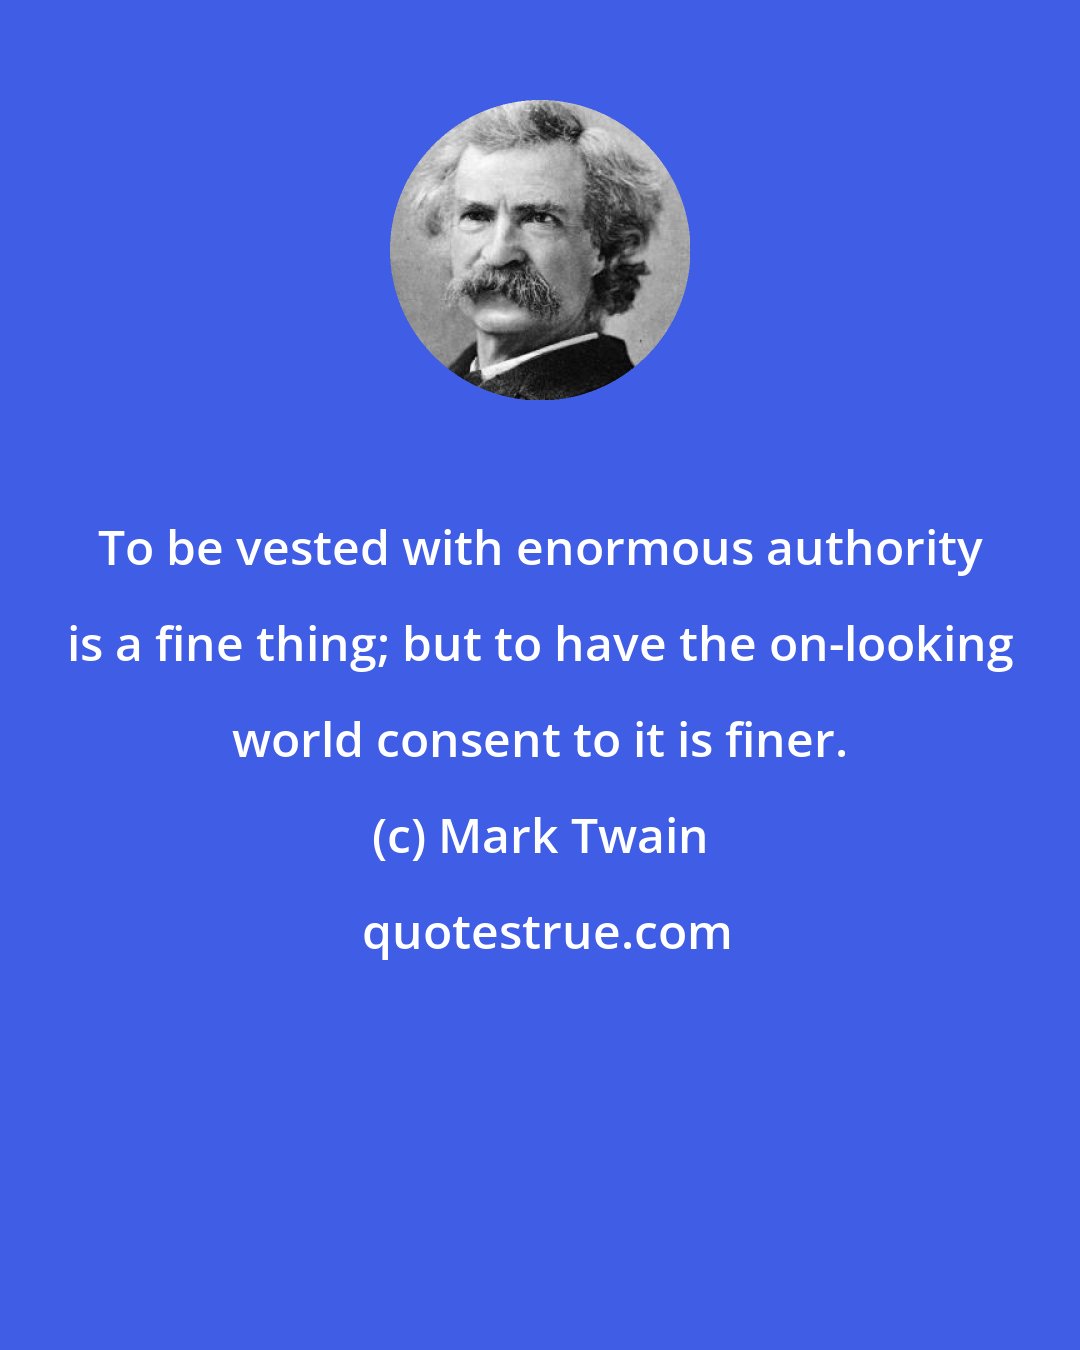 Mark Twain: To be vested with enormous authority is a fine thing; but to have the on-looking world consent to it is finer.